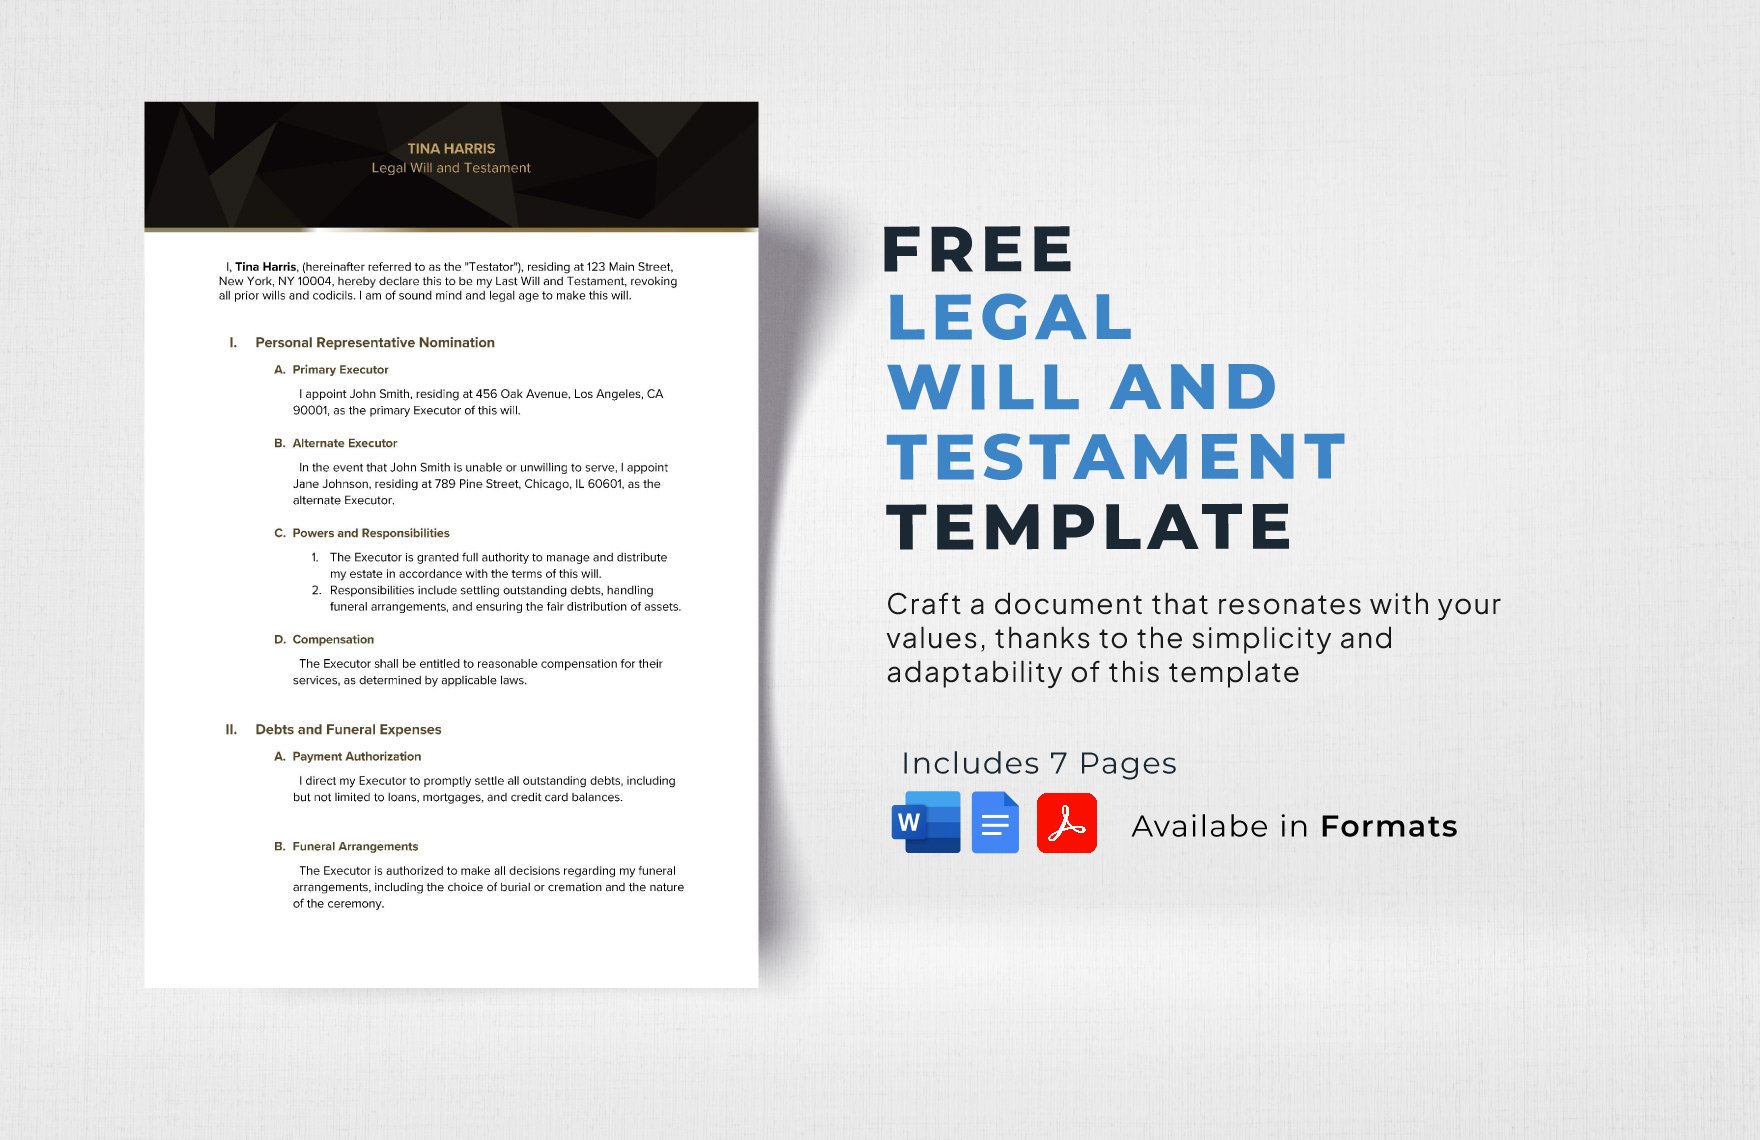 Legal Will and Testament Template